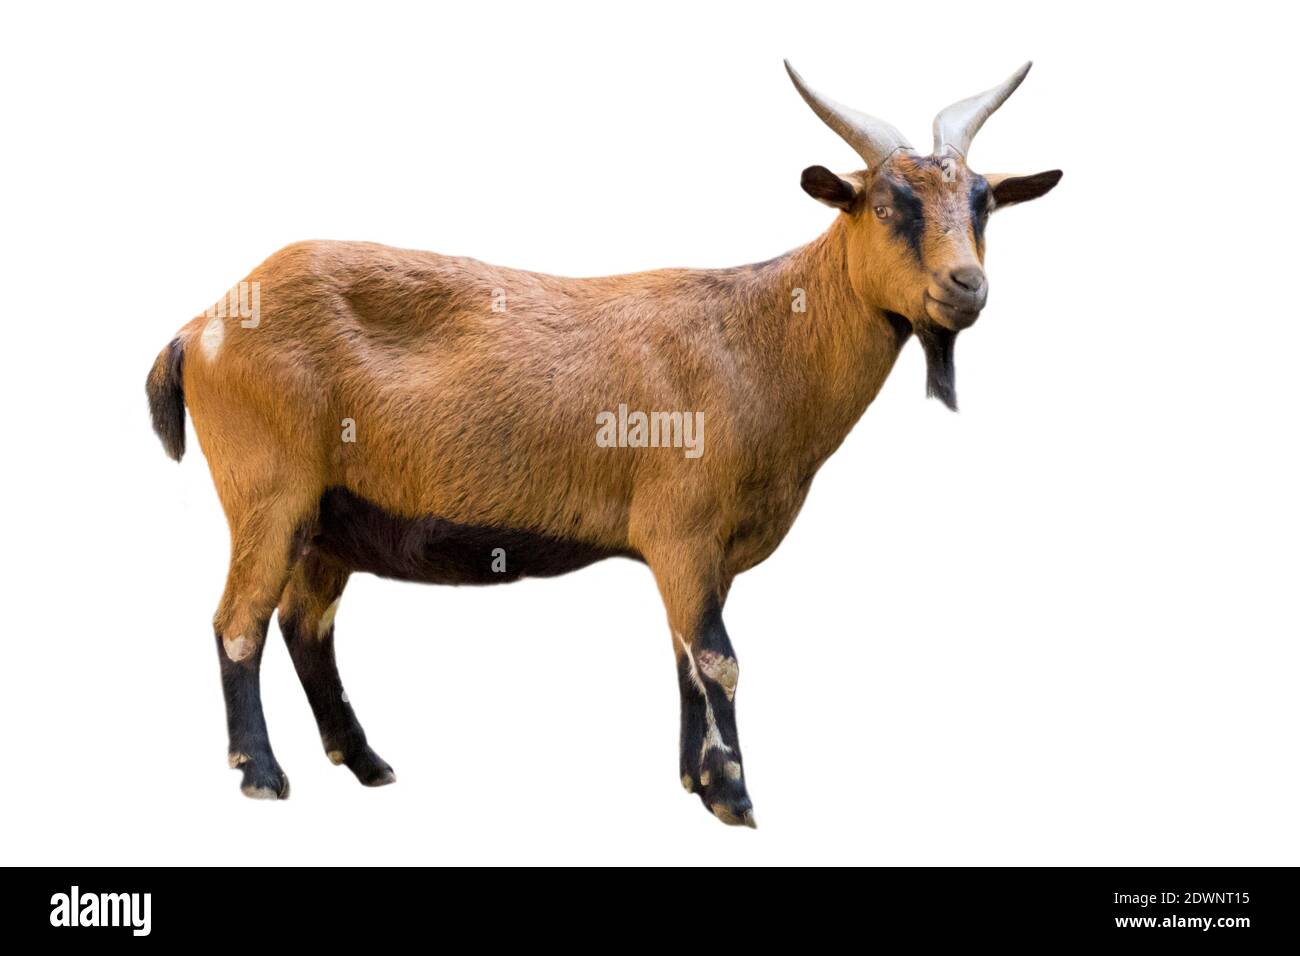 Image of a brown goat on white background. Farm Animals. Stock Photo